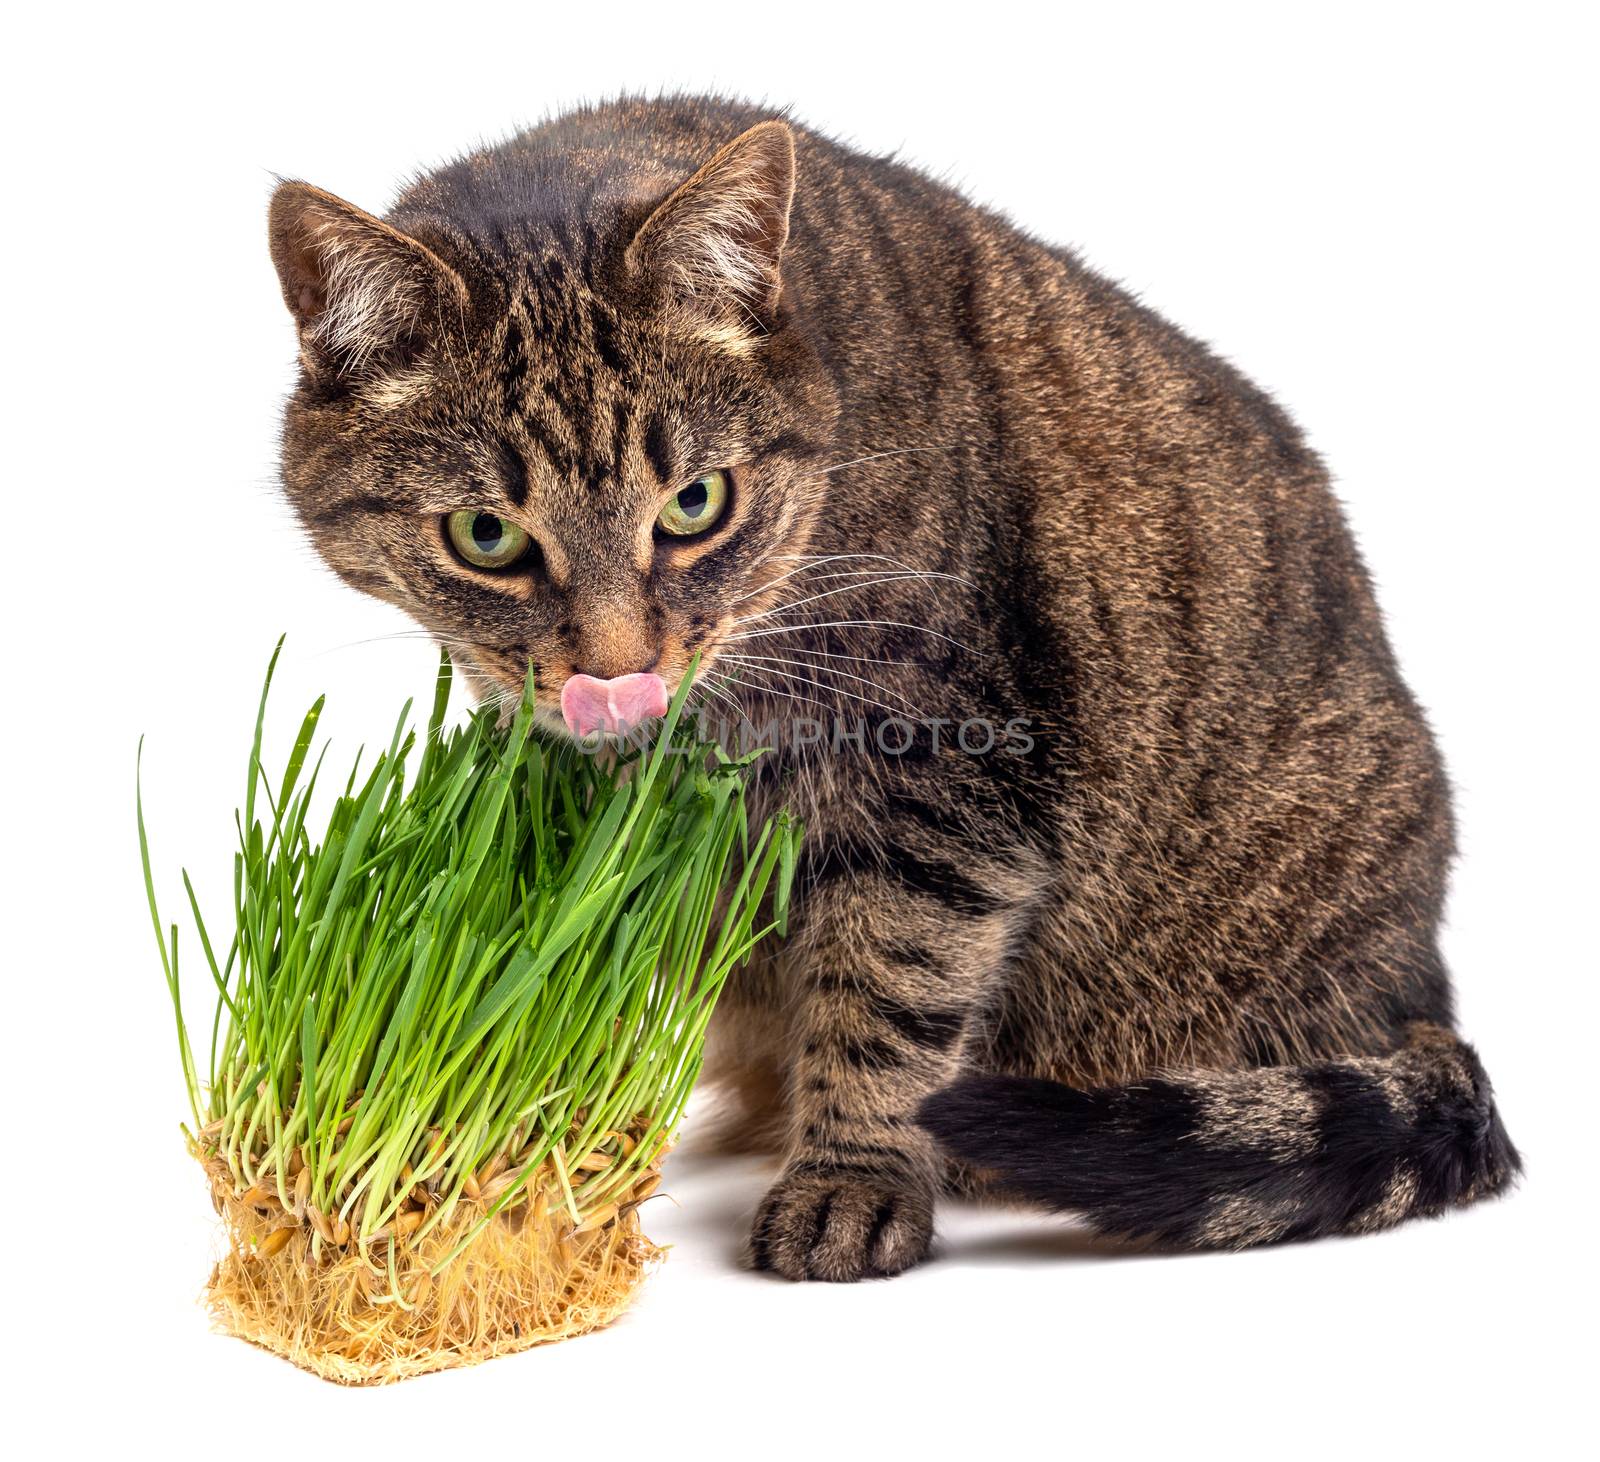 Yellow eyed tabby cat eating fresh green hydroponic oats sprouts close-up isolated on white background with selective focus and blur. Licking its nose with pink tongue.